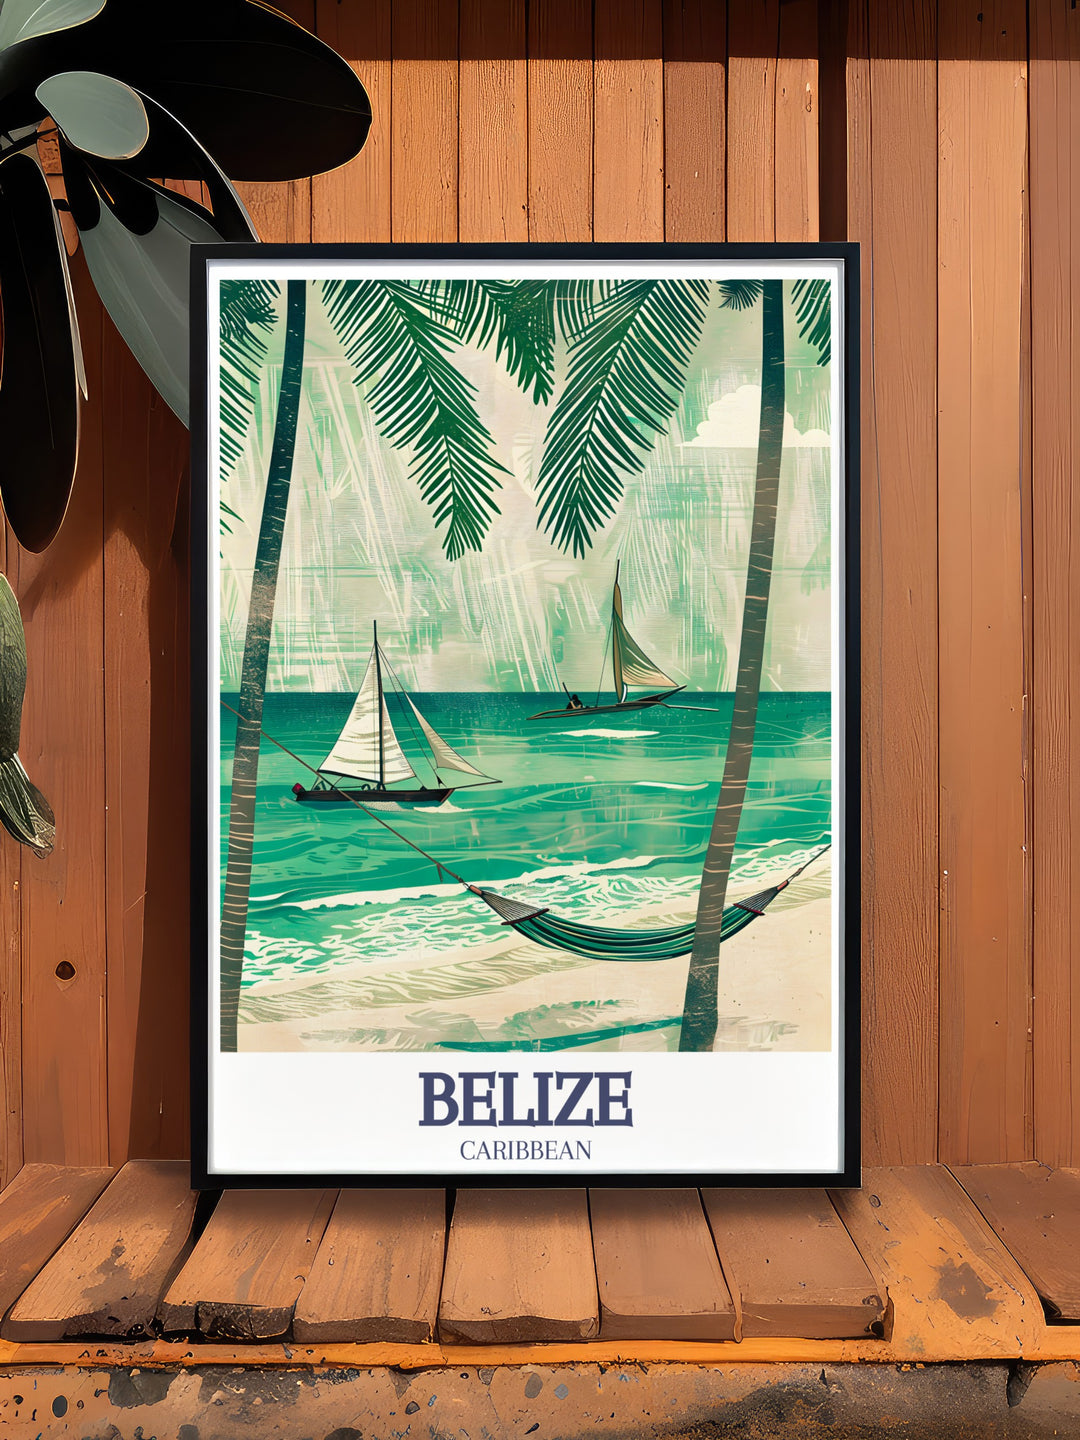 Secret Beach Ambergris Caye artwork showcasing the natural beauty and peaceful charm of the Caribbean ideal for those who appreciate high quality art and the vibrant energy of tropical destinations